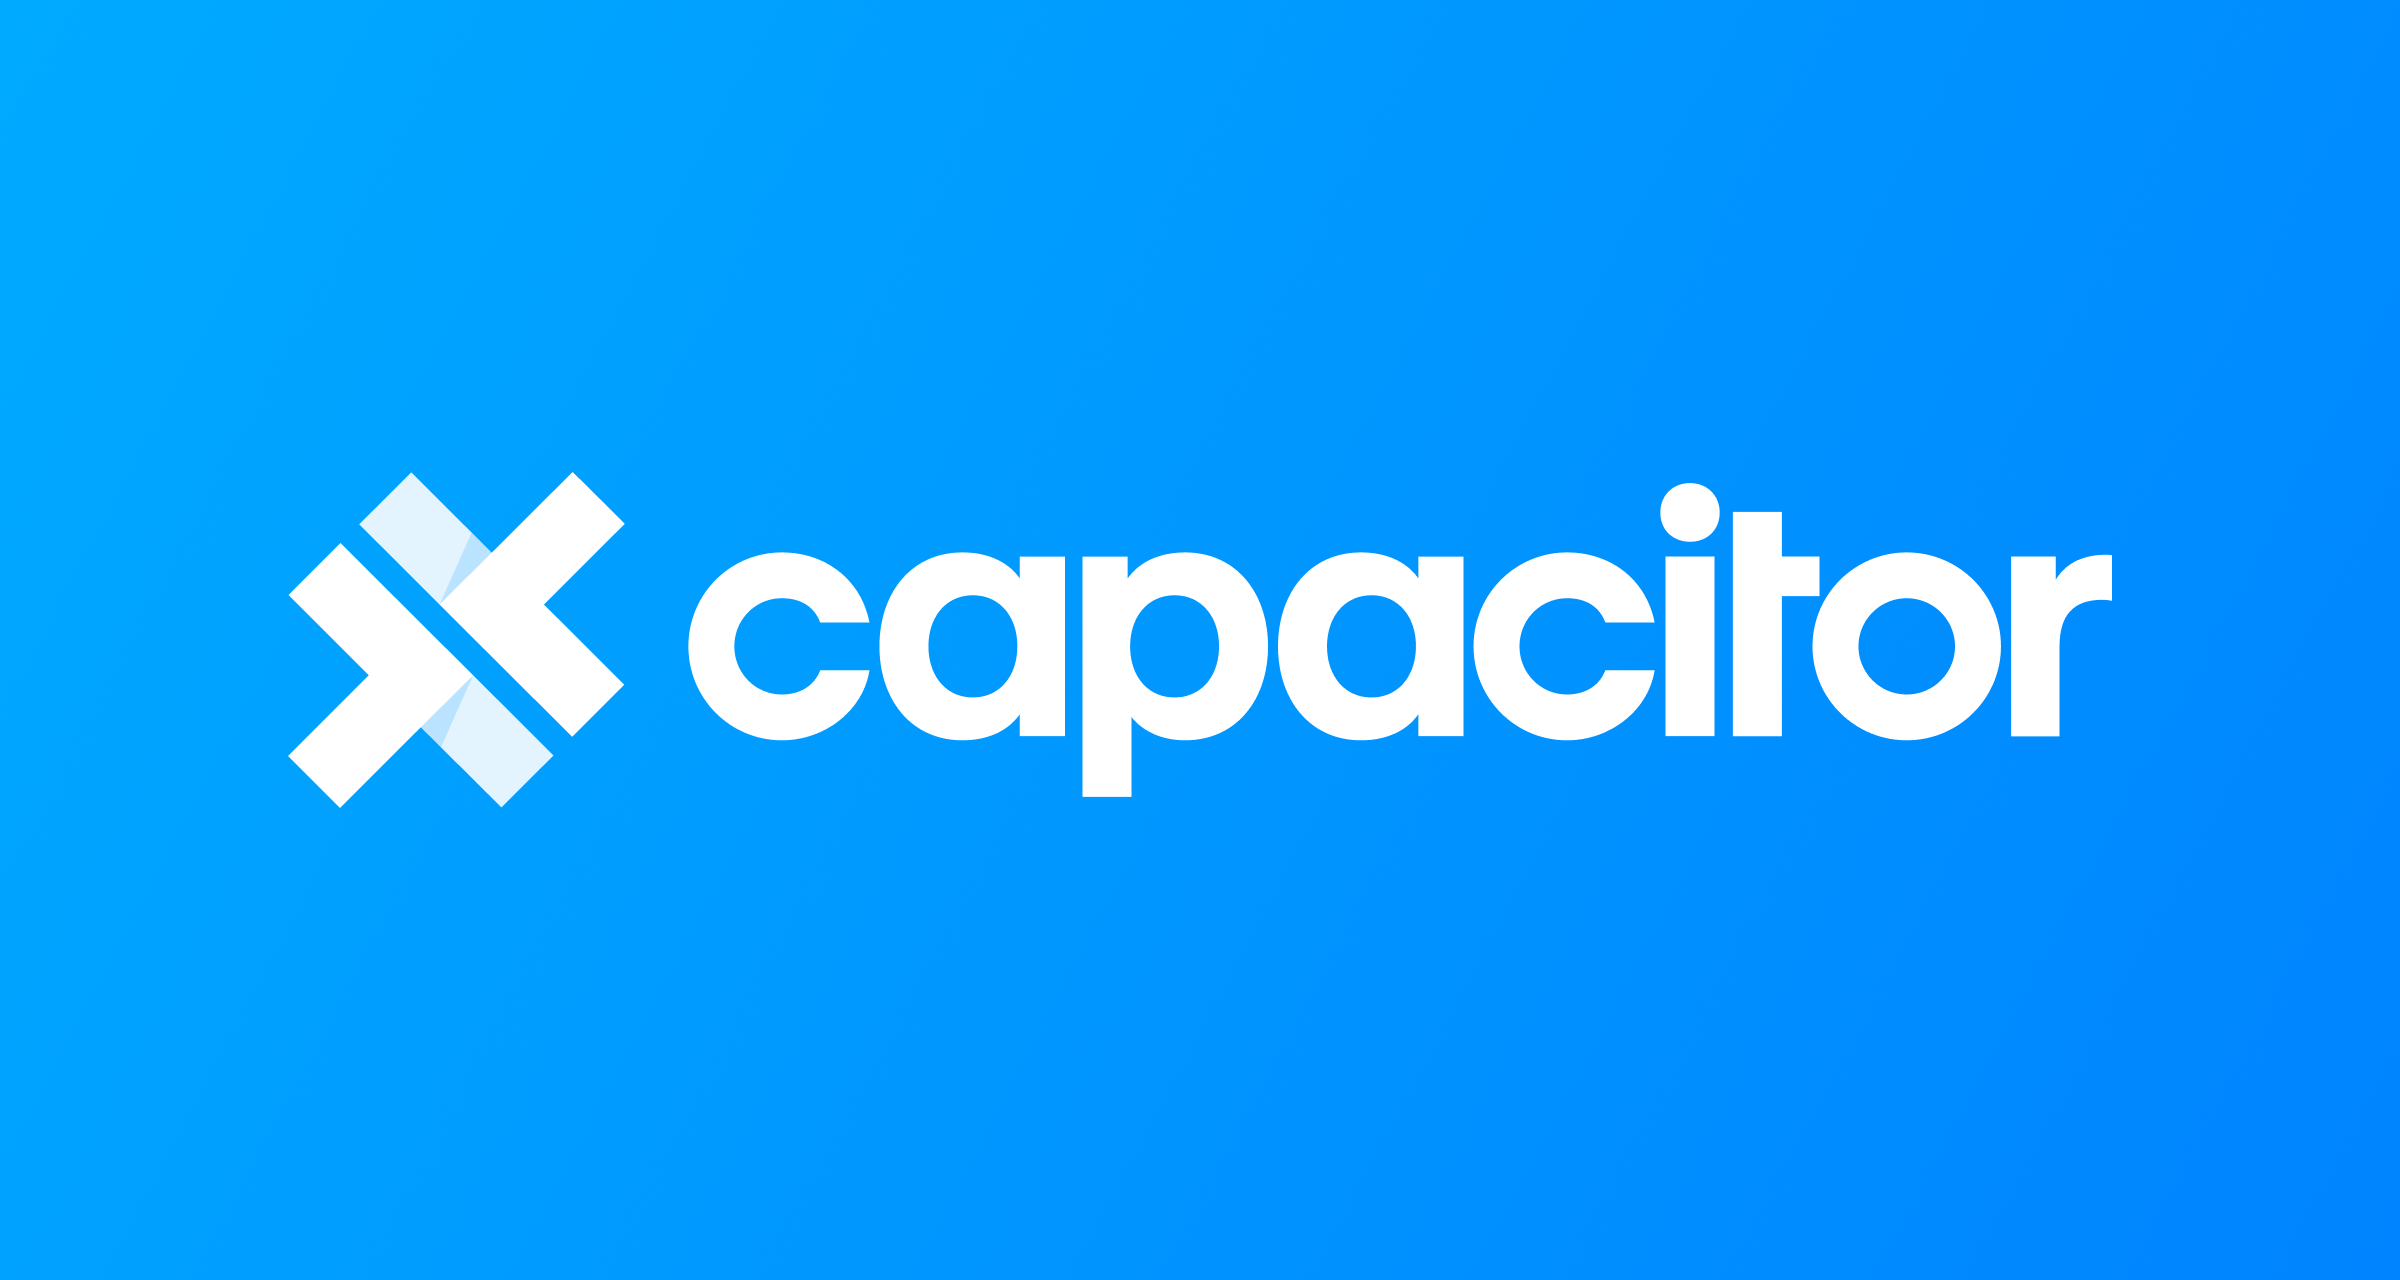 Capacitor by Ionic - Cross-platform apps with web technology